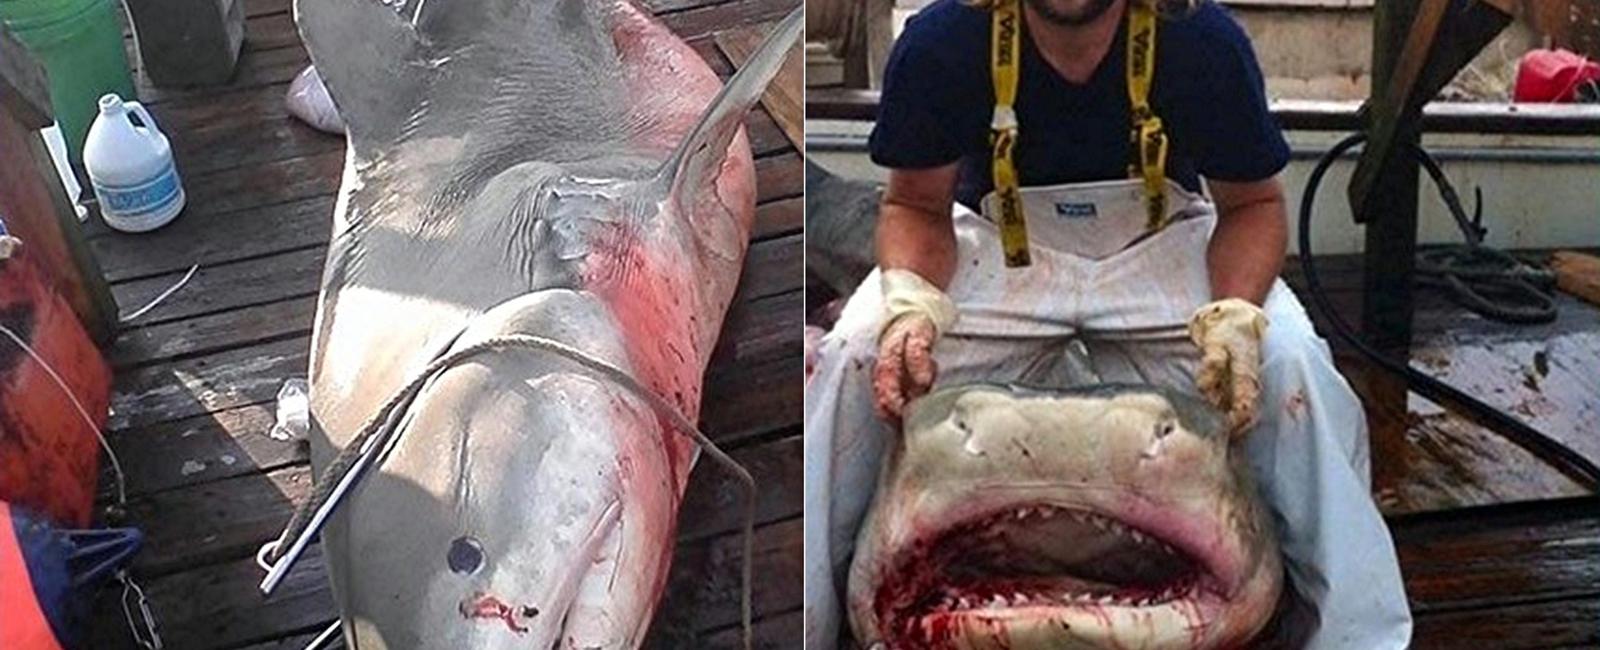 13 year old boy reeled in with the help of his father an almost 900 pound tiger shark in the gulf of mexico for this team to catch the shark it took 36 hours